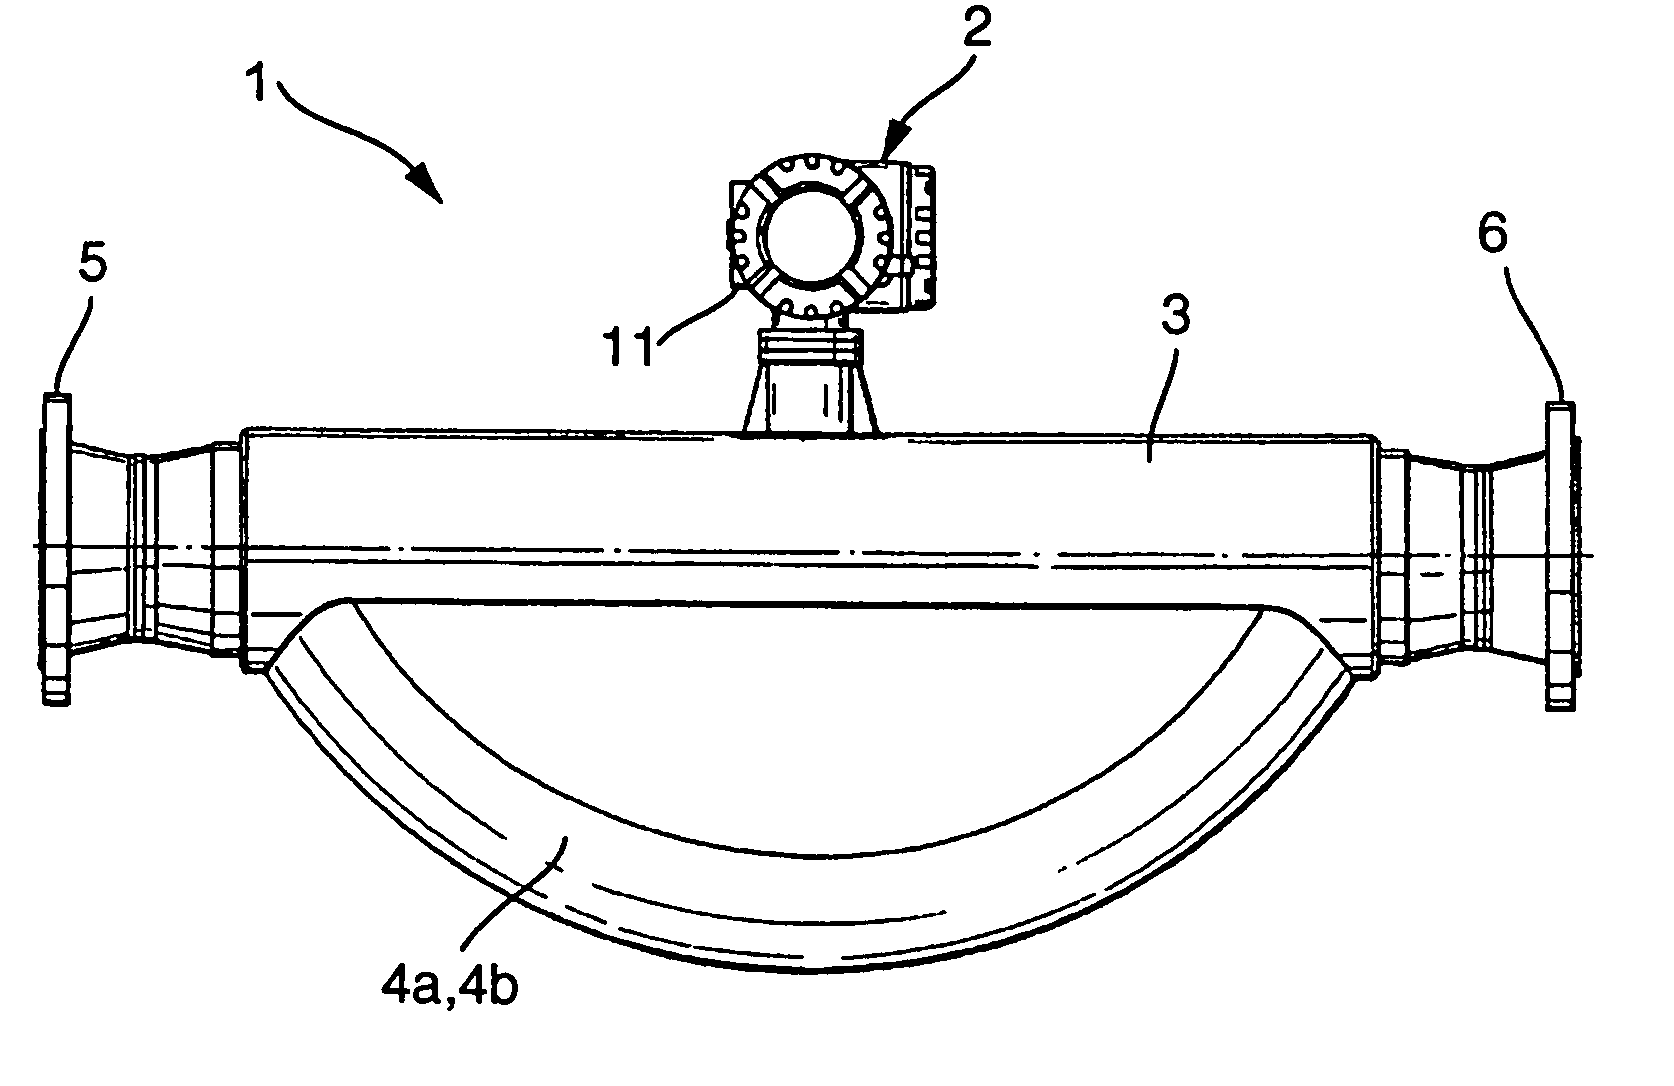 Apparatus for monitoring a measurement transmitter of a field device